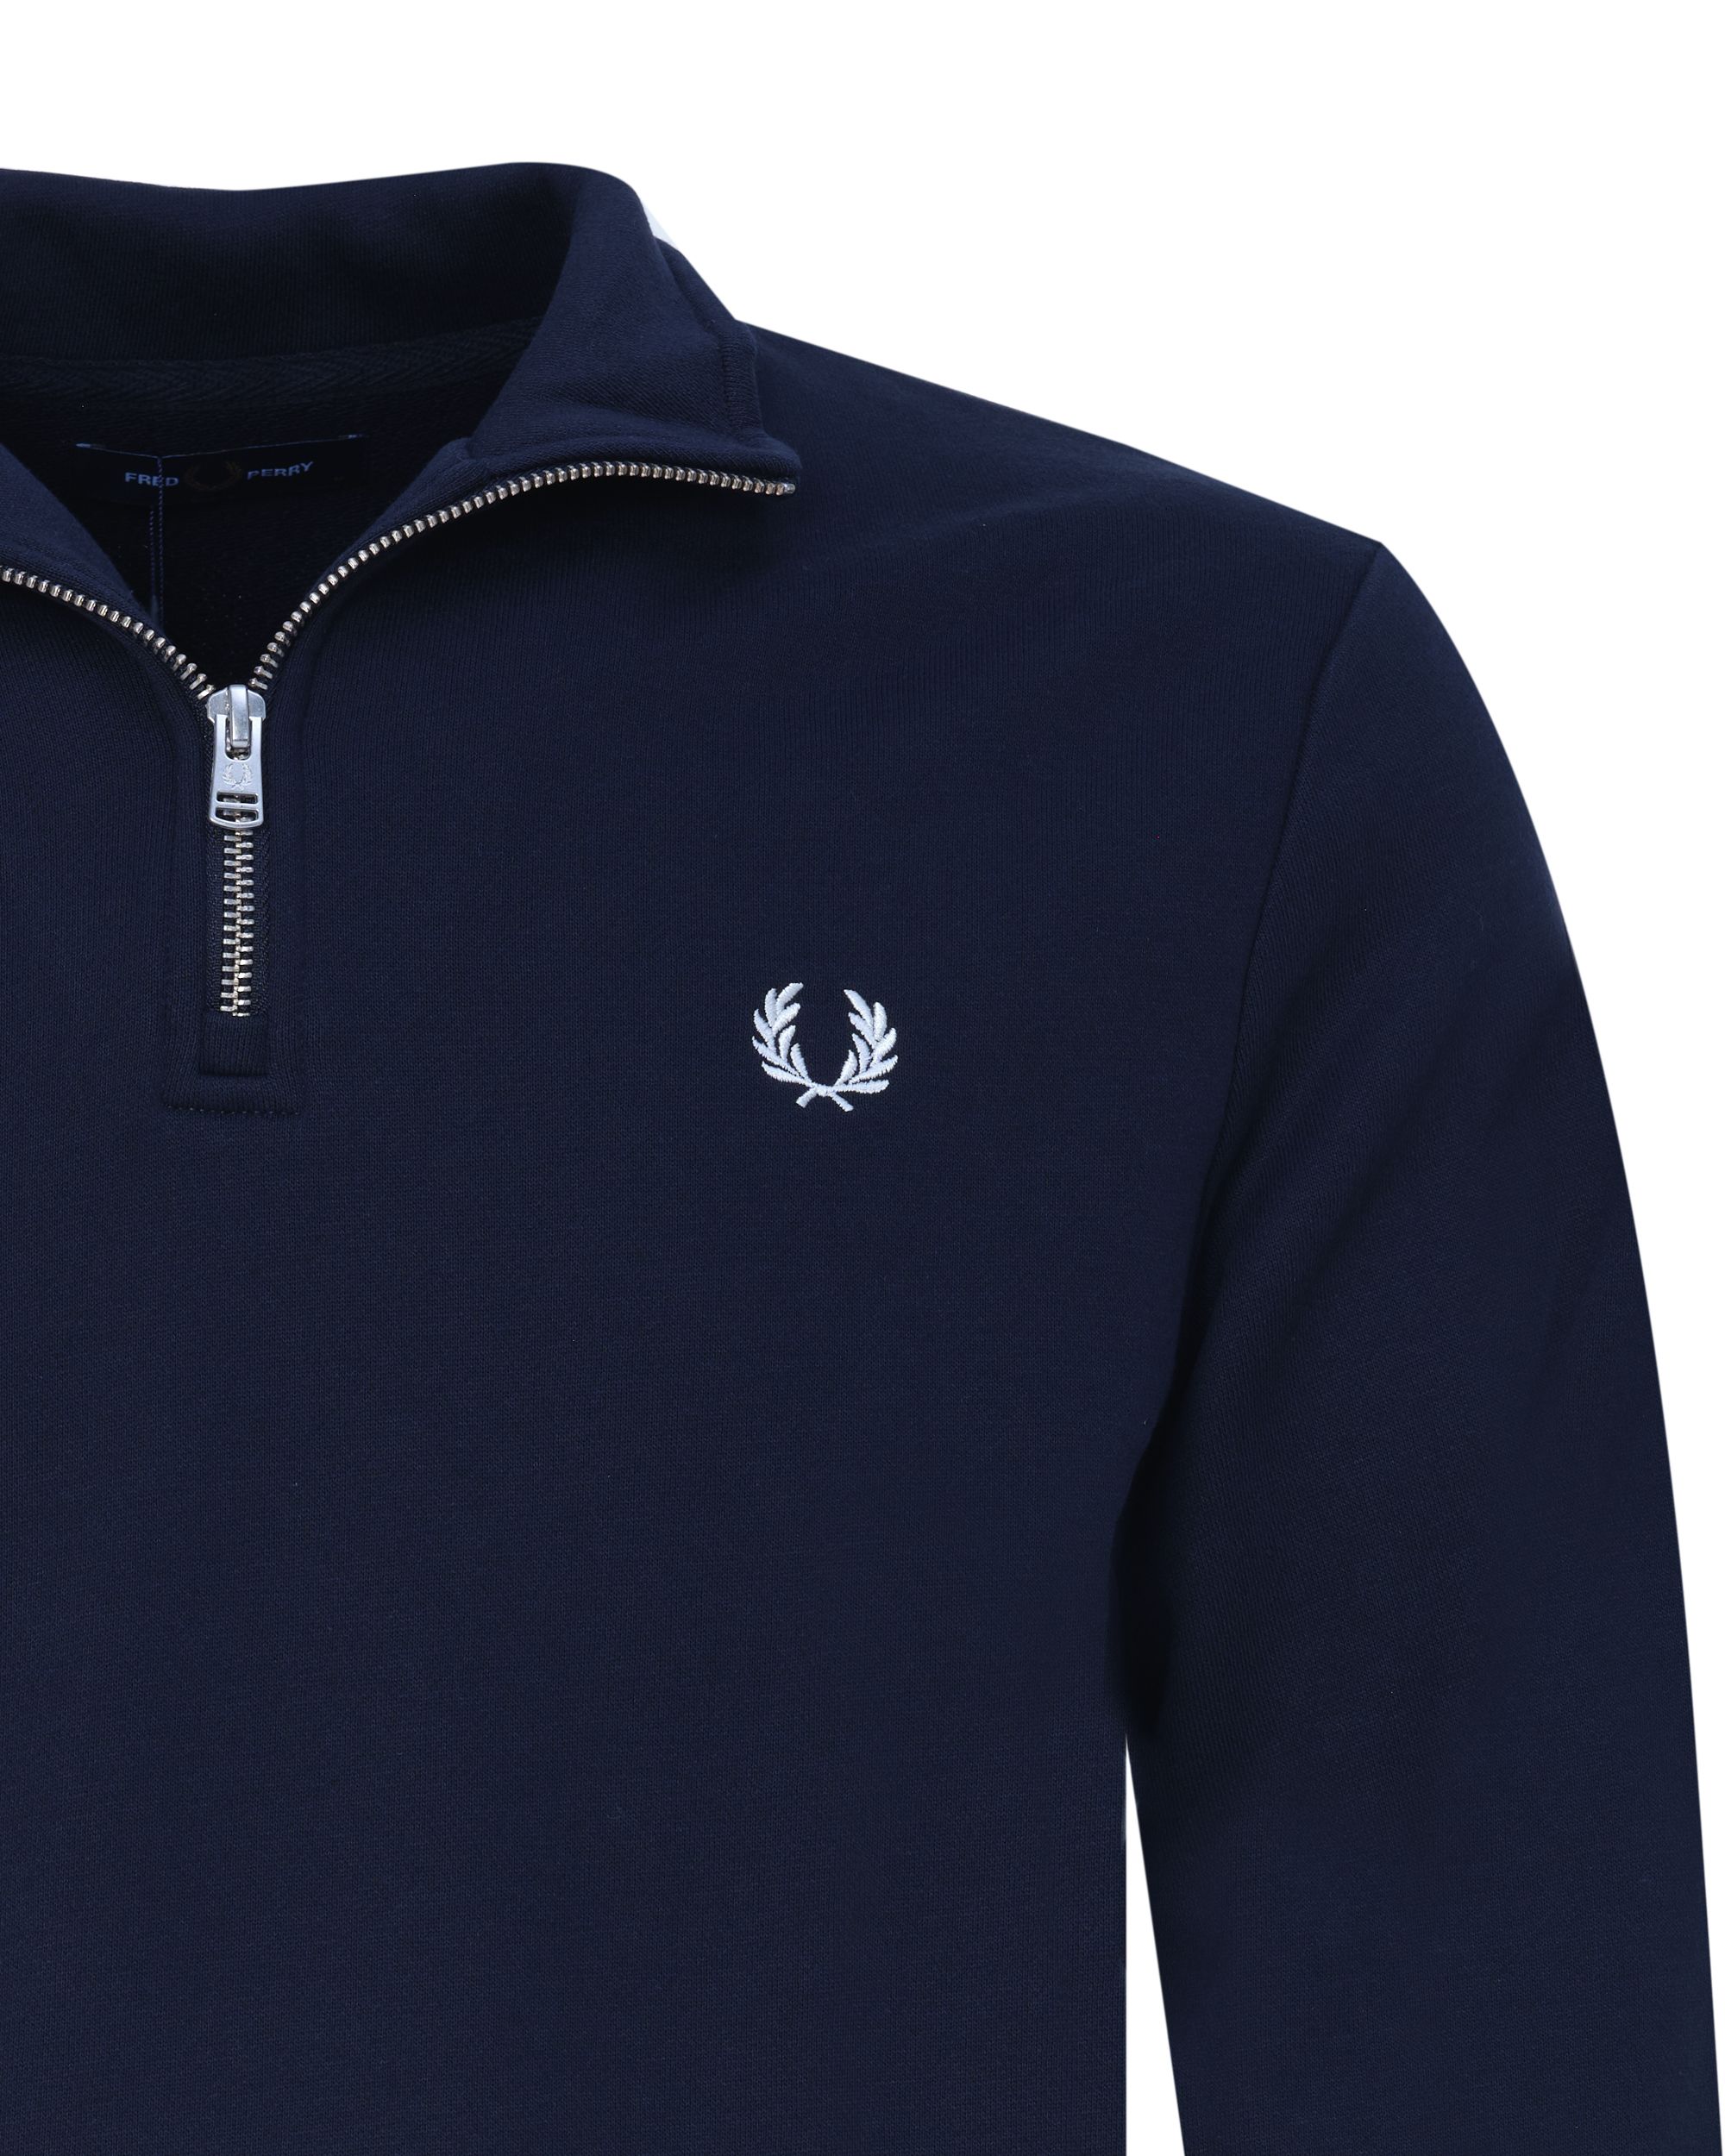 Fred Perry Schipperstrui Donker blauw 080348-002-L